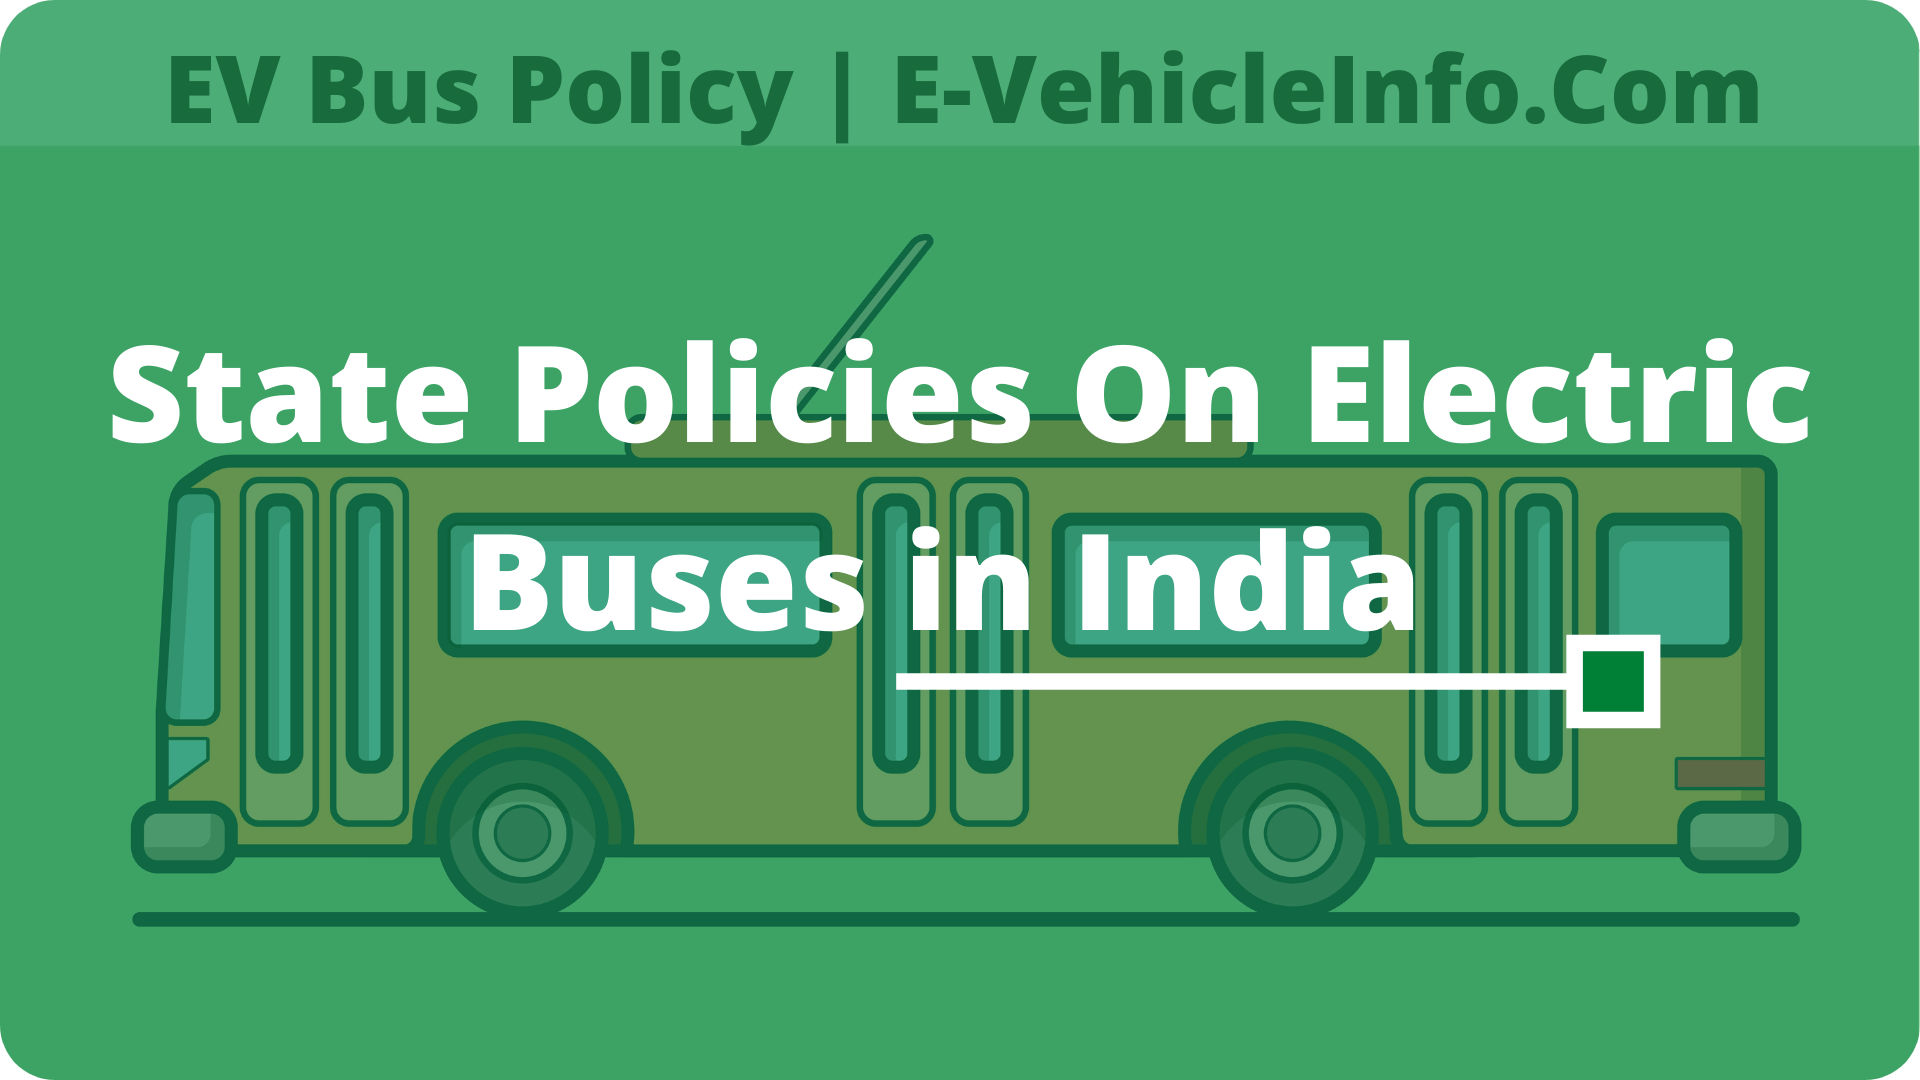 https://e-vehicleinfo.com/state-wise-ev-policies-for-electric-bus-in-india/